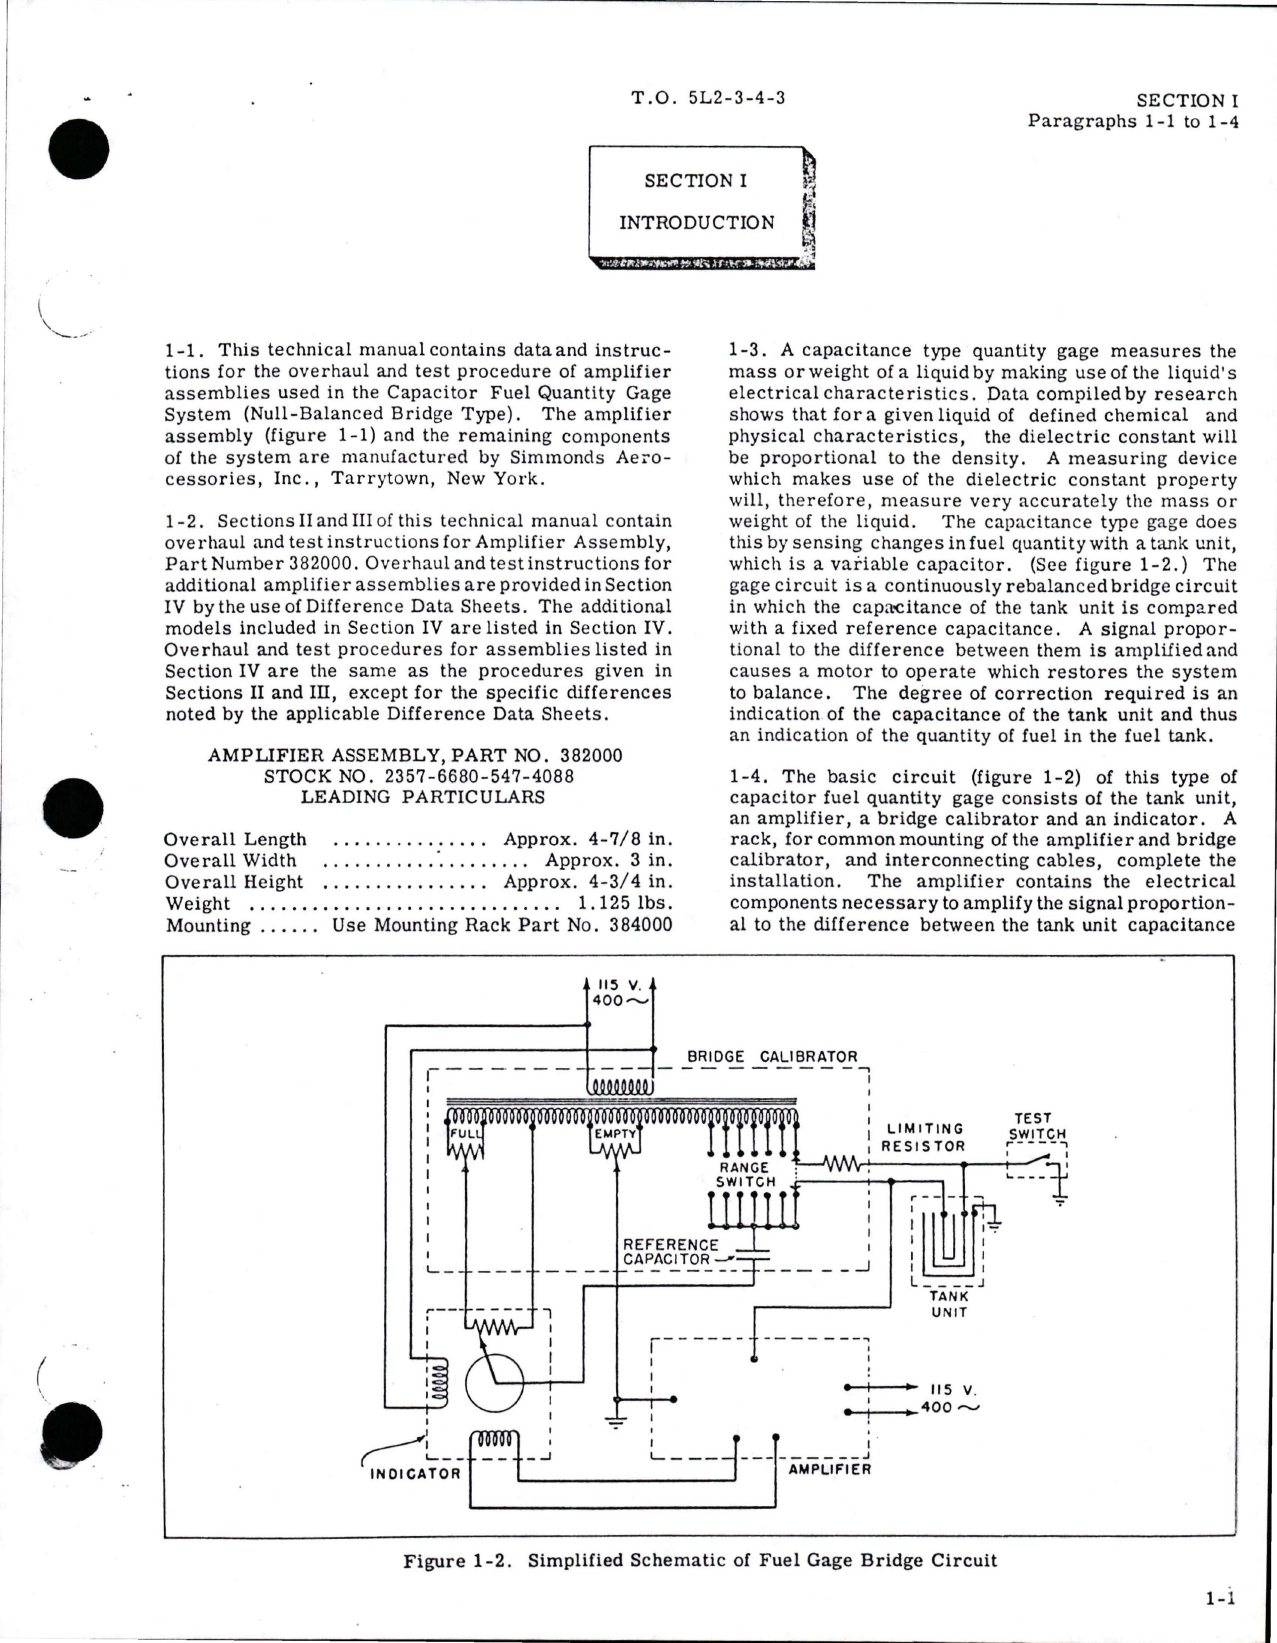 Sample page 5 from AirCorps Library document: Overhaul for Capacitor Fuel Gage System Amplifier Assemblies - Parts 382000 and 382000-1